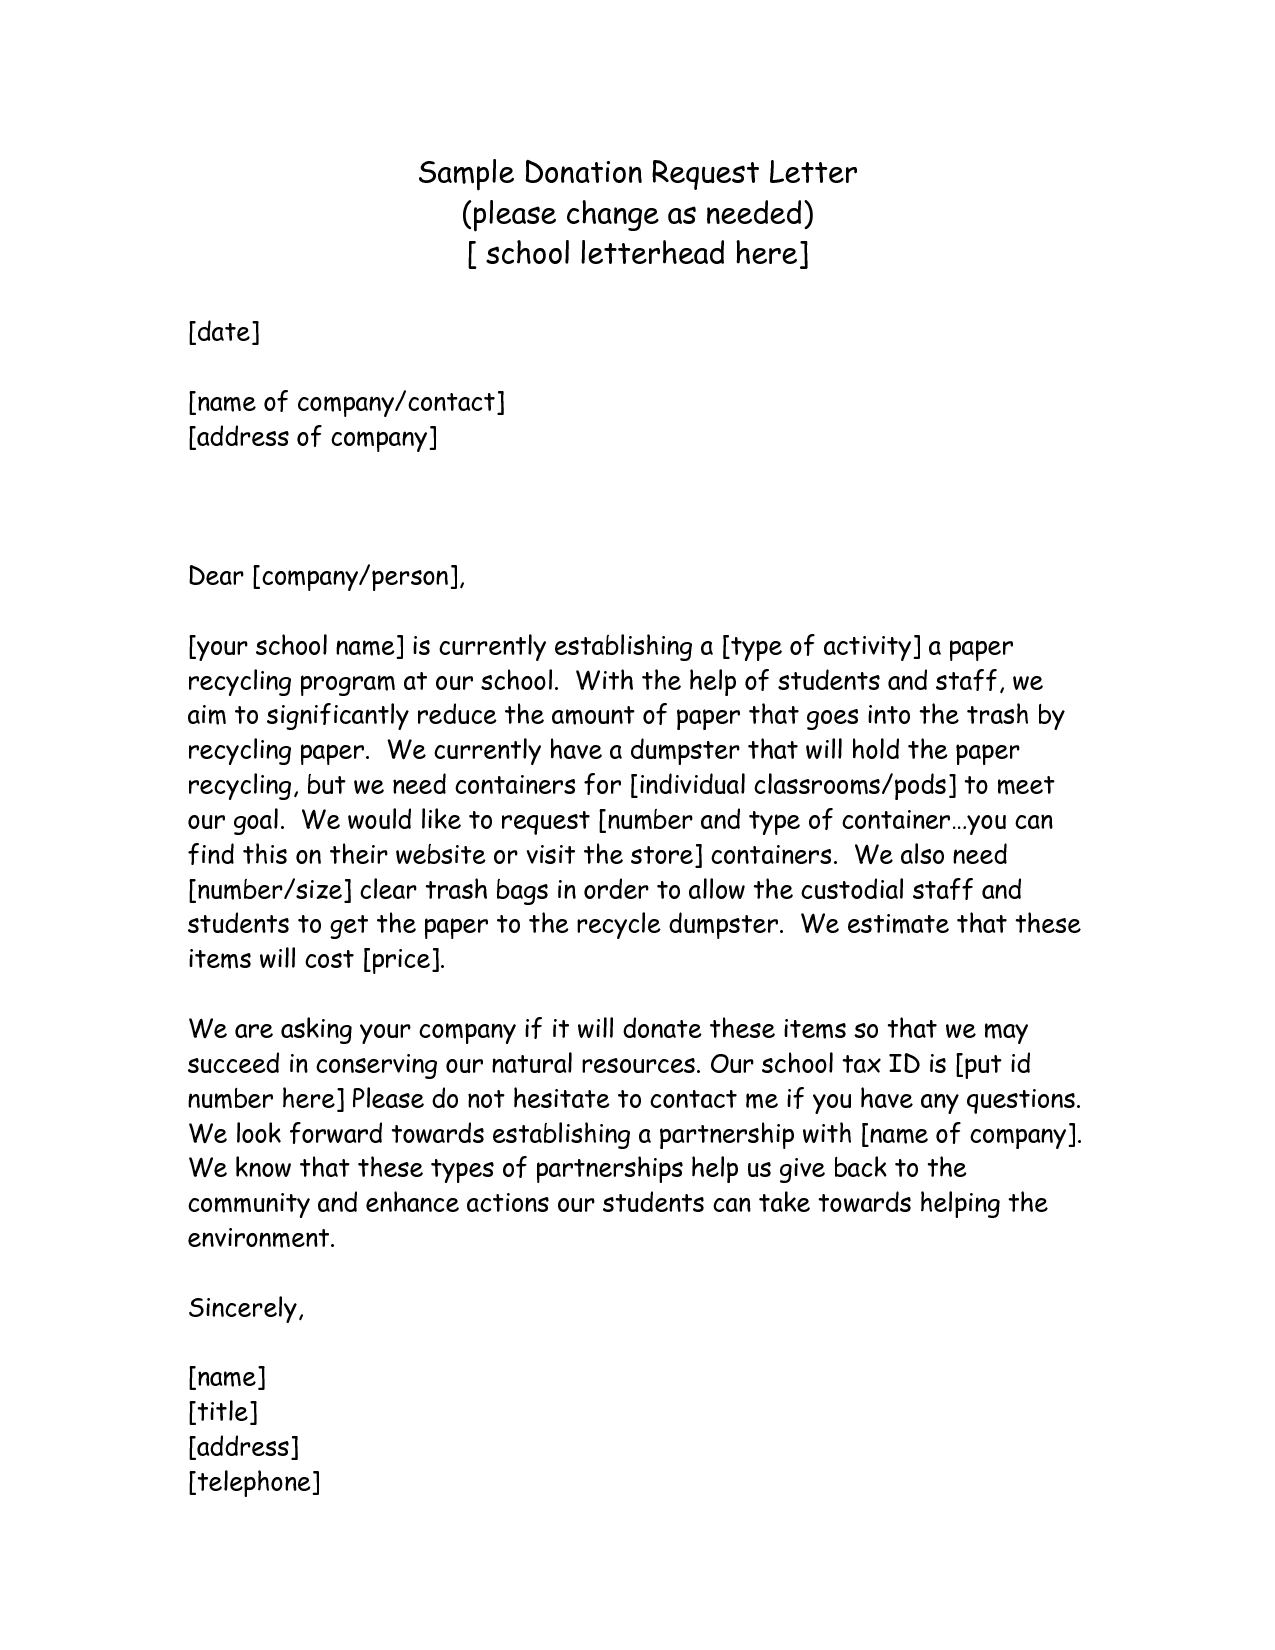 Sample Fundraising Letter Template - Examples for Donation Letters